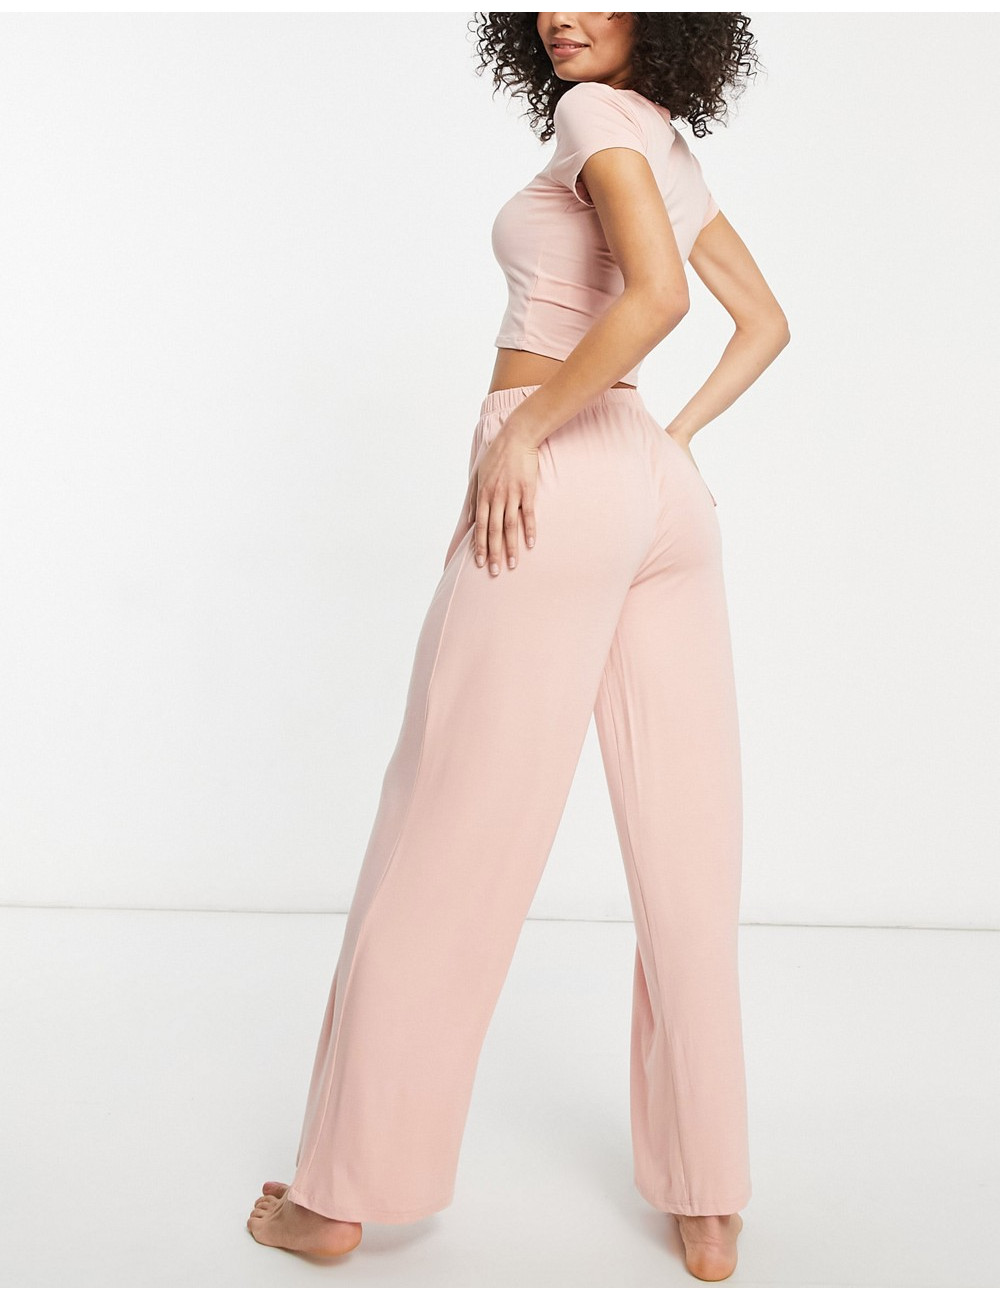 Missguided Tall crop top...